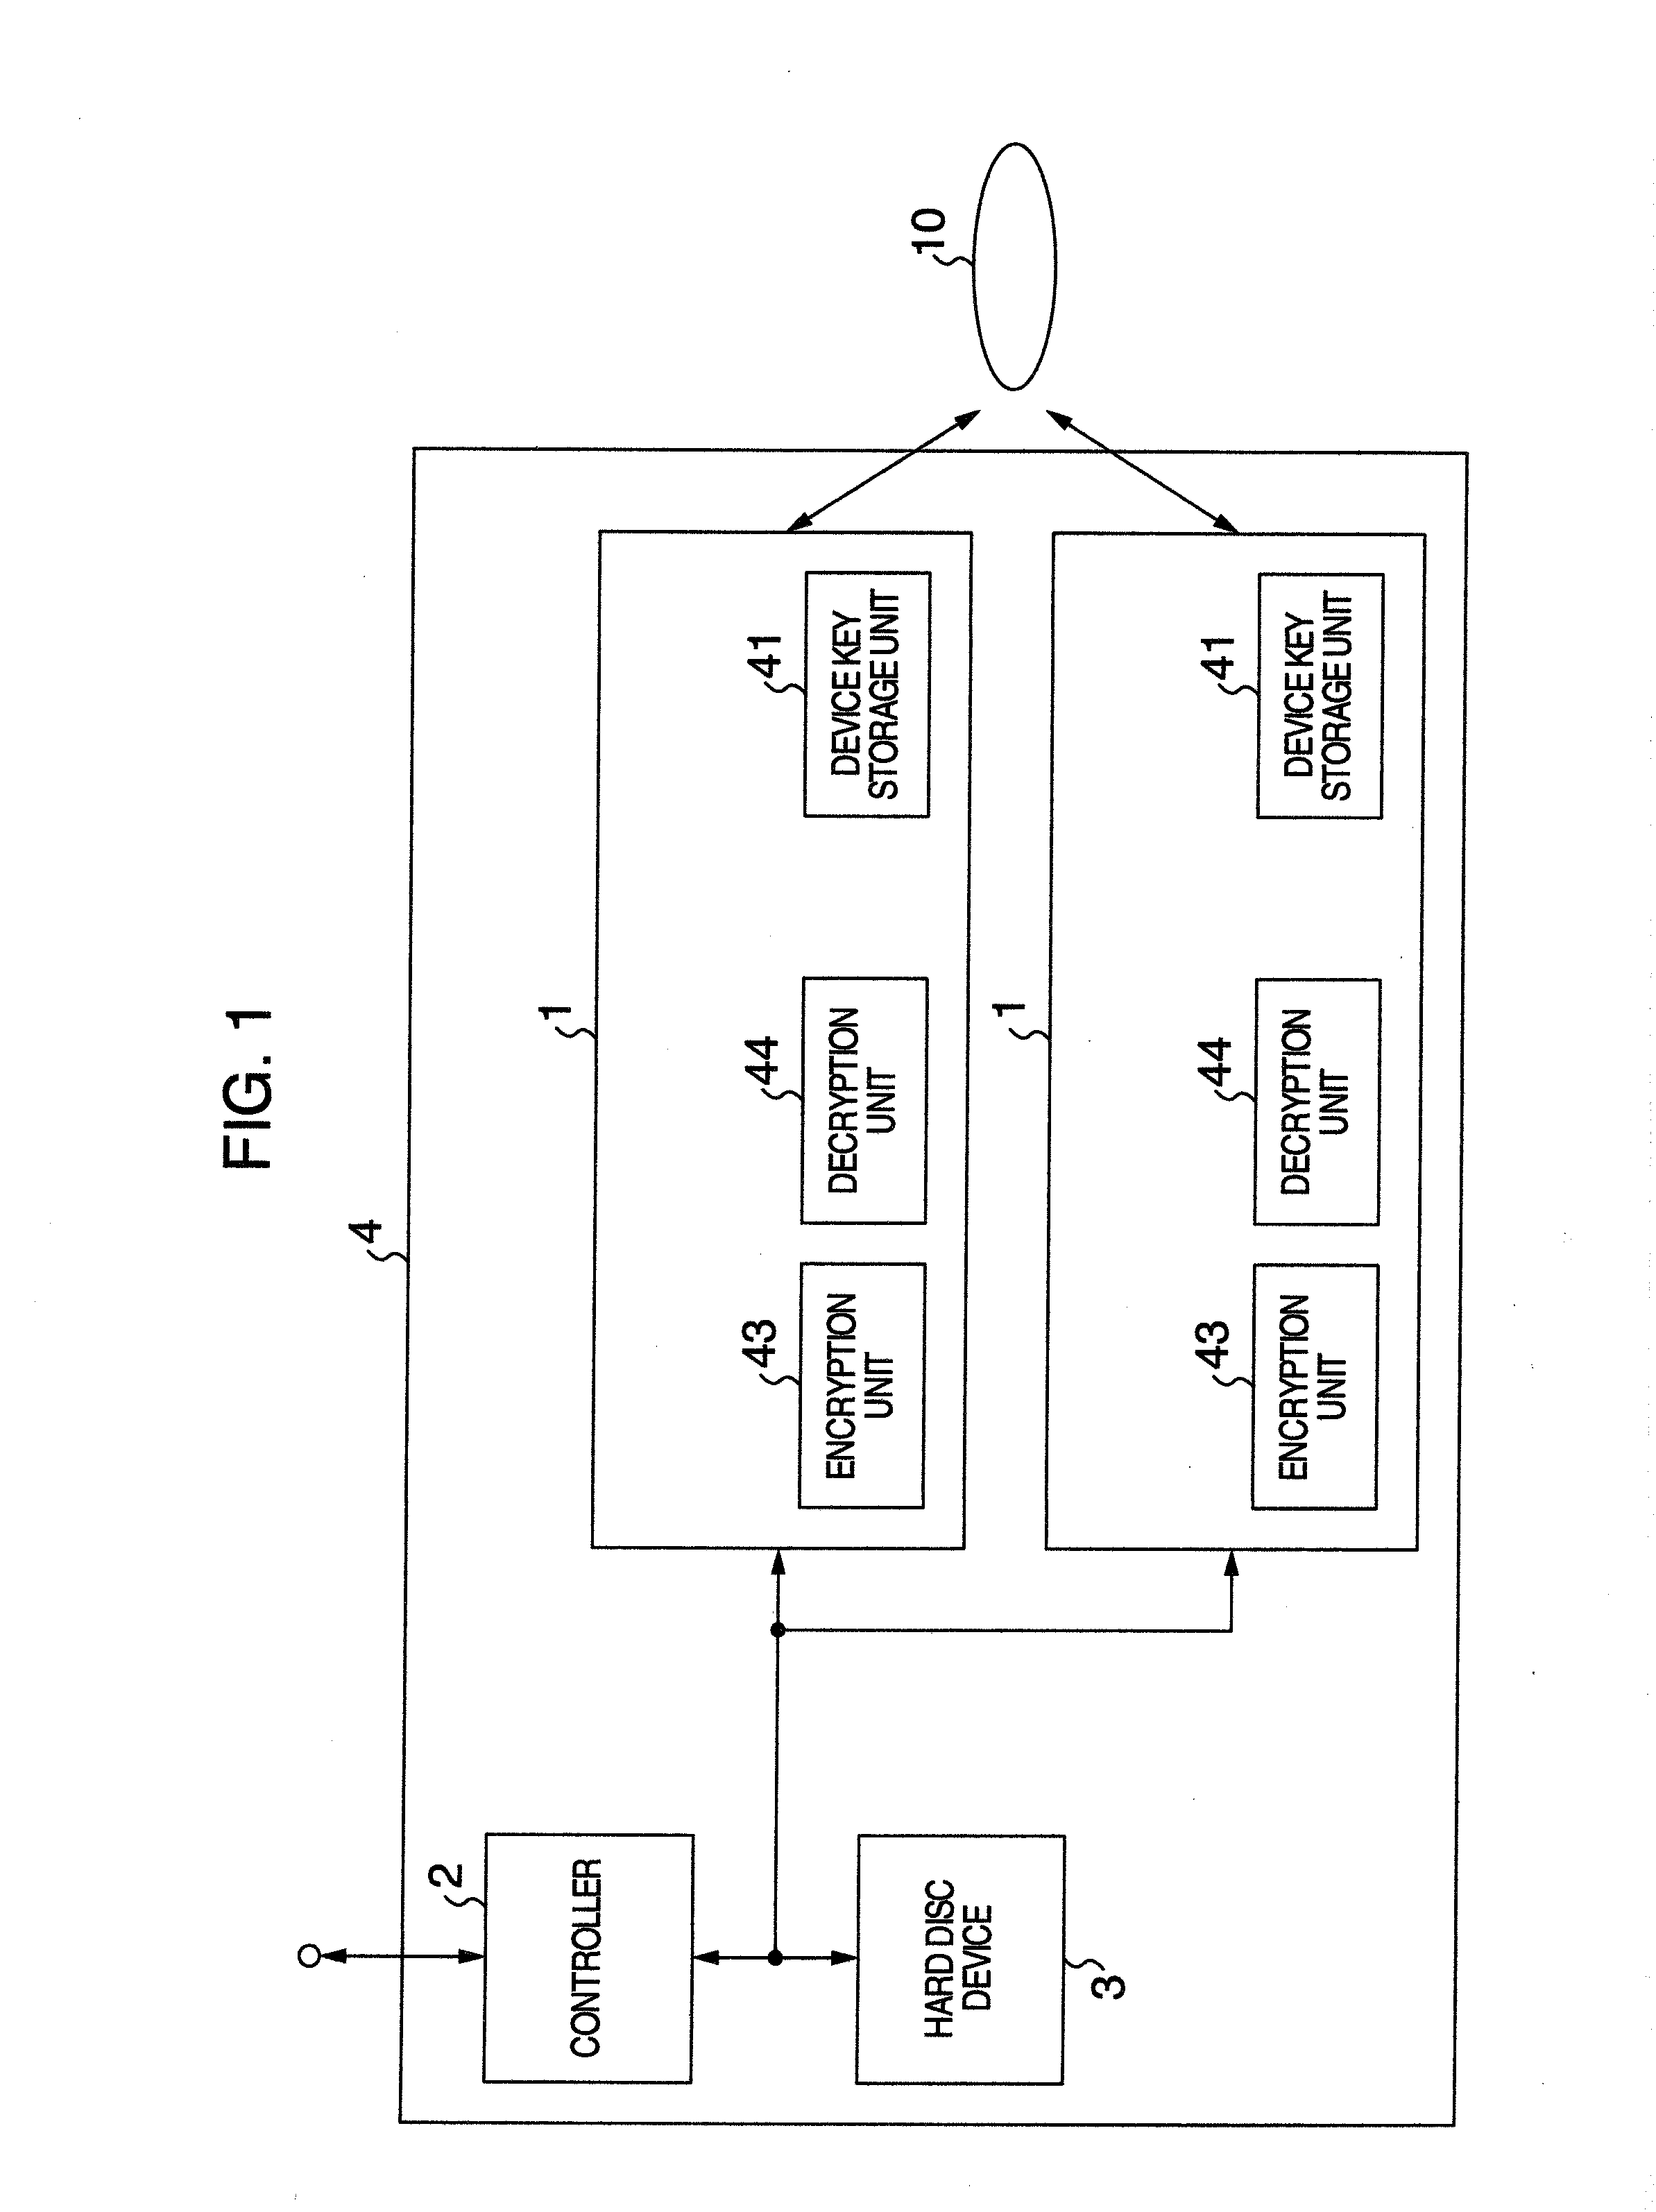 Optical disc, optical disc recording method, optical disc reproduction method, optical disc device and storage system